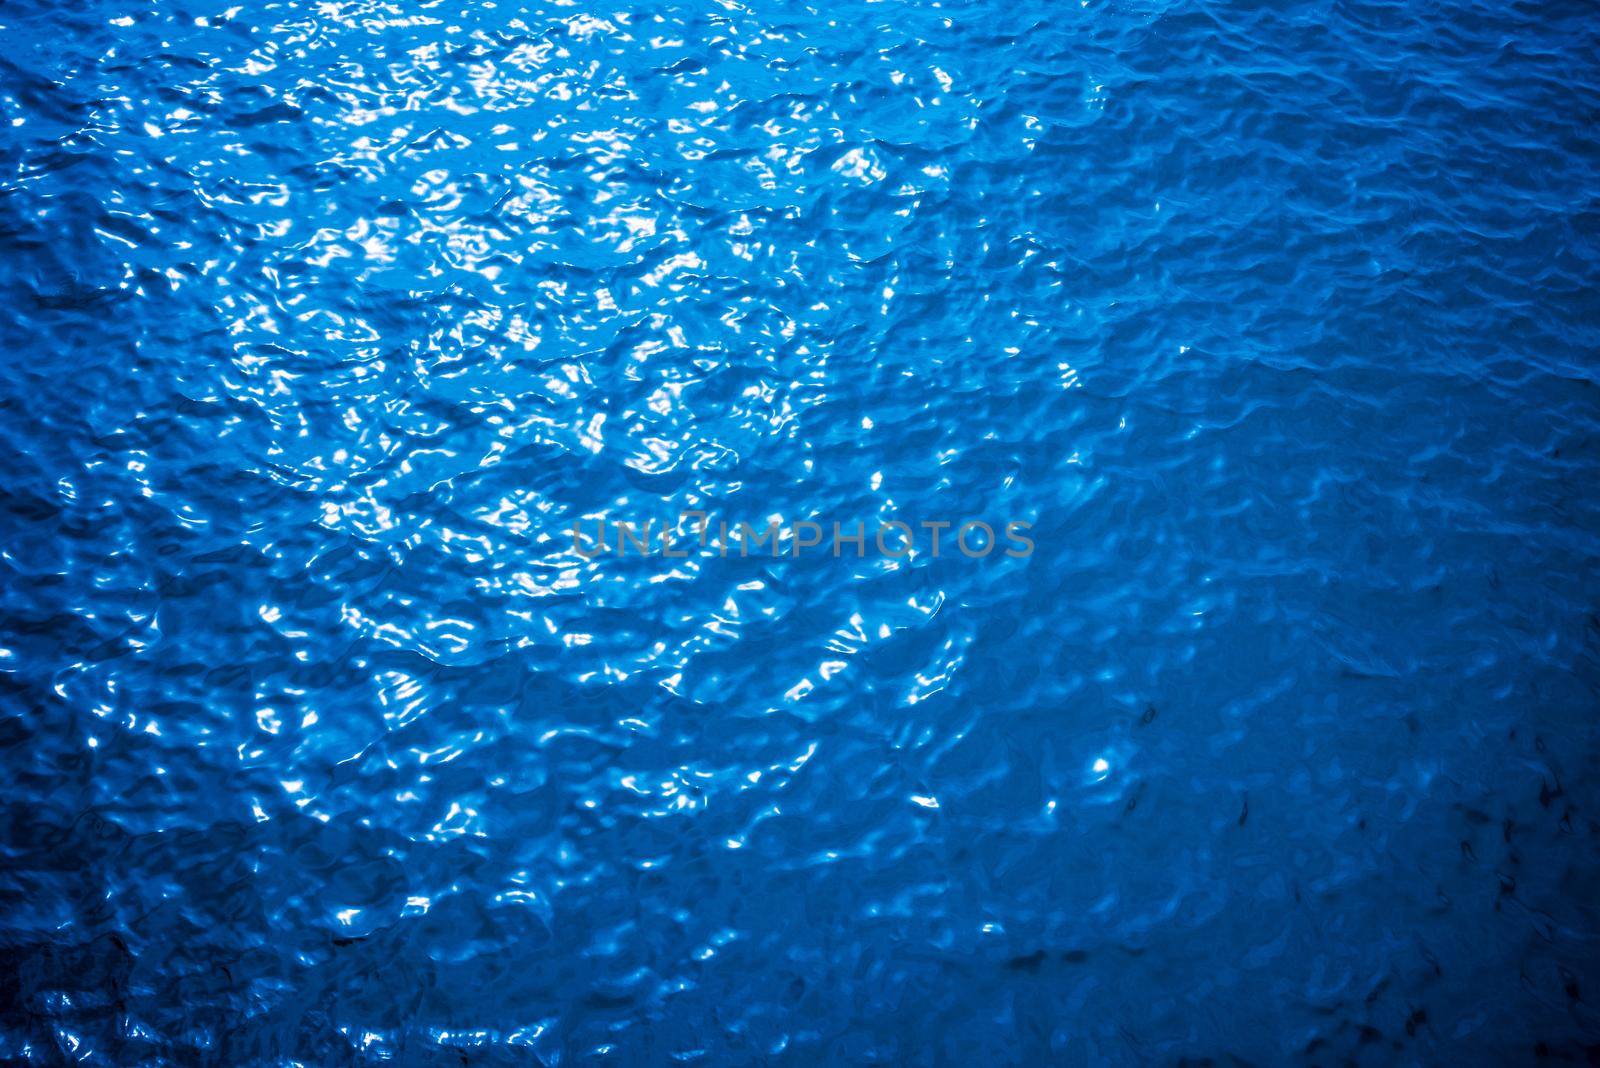 Blue turquoise water surface texture of the sea has small ripple pattern reflecting the shining evening sunlight at sunset, Beautiful nature of the ocean from the top aerial view for summer background